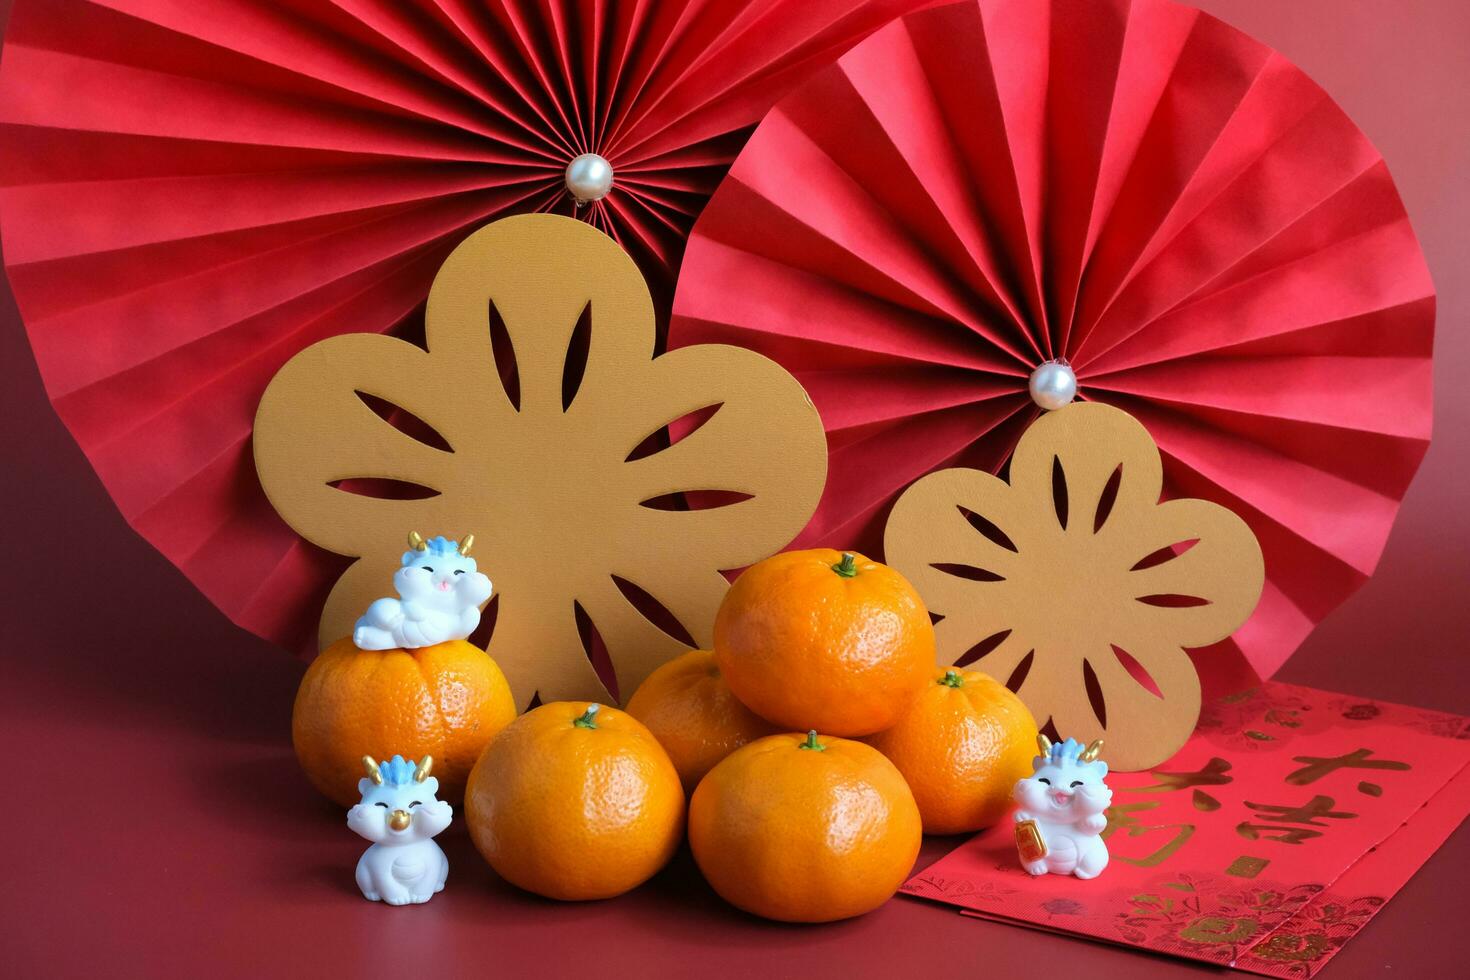 Chinese New Year of the dragon festival concept. Mandarin orange, red envelopes, dragon and gold ingot with red paper fans. Chinese character da ji da li meaning great luck great profit. photo